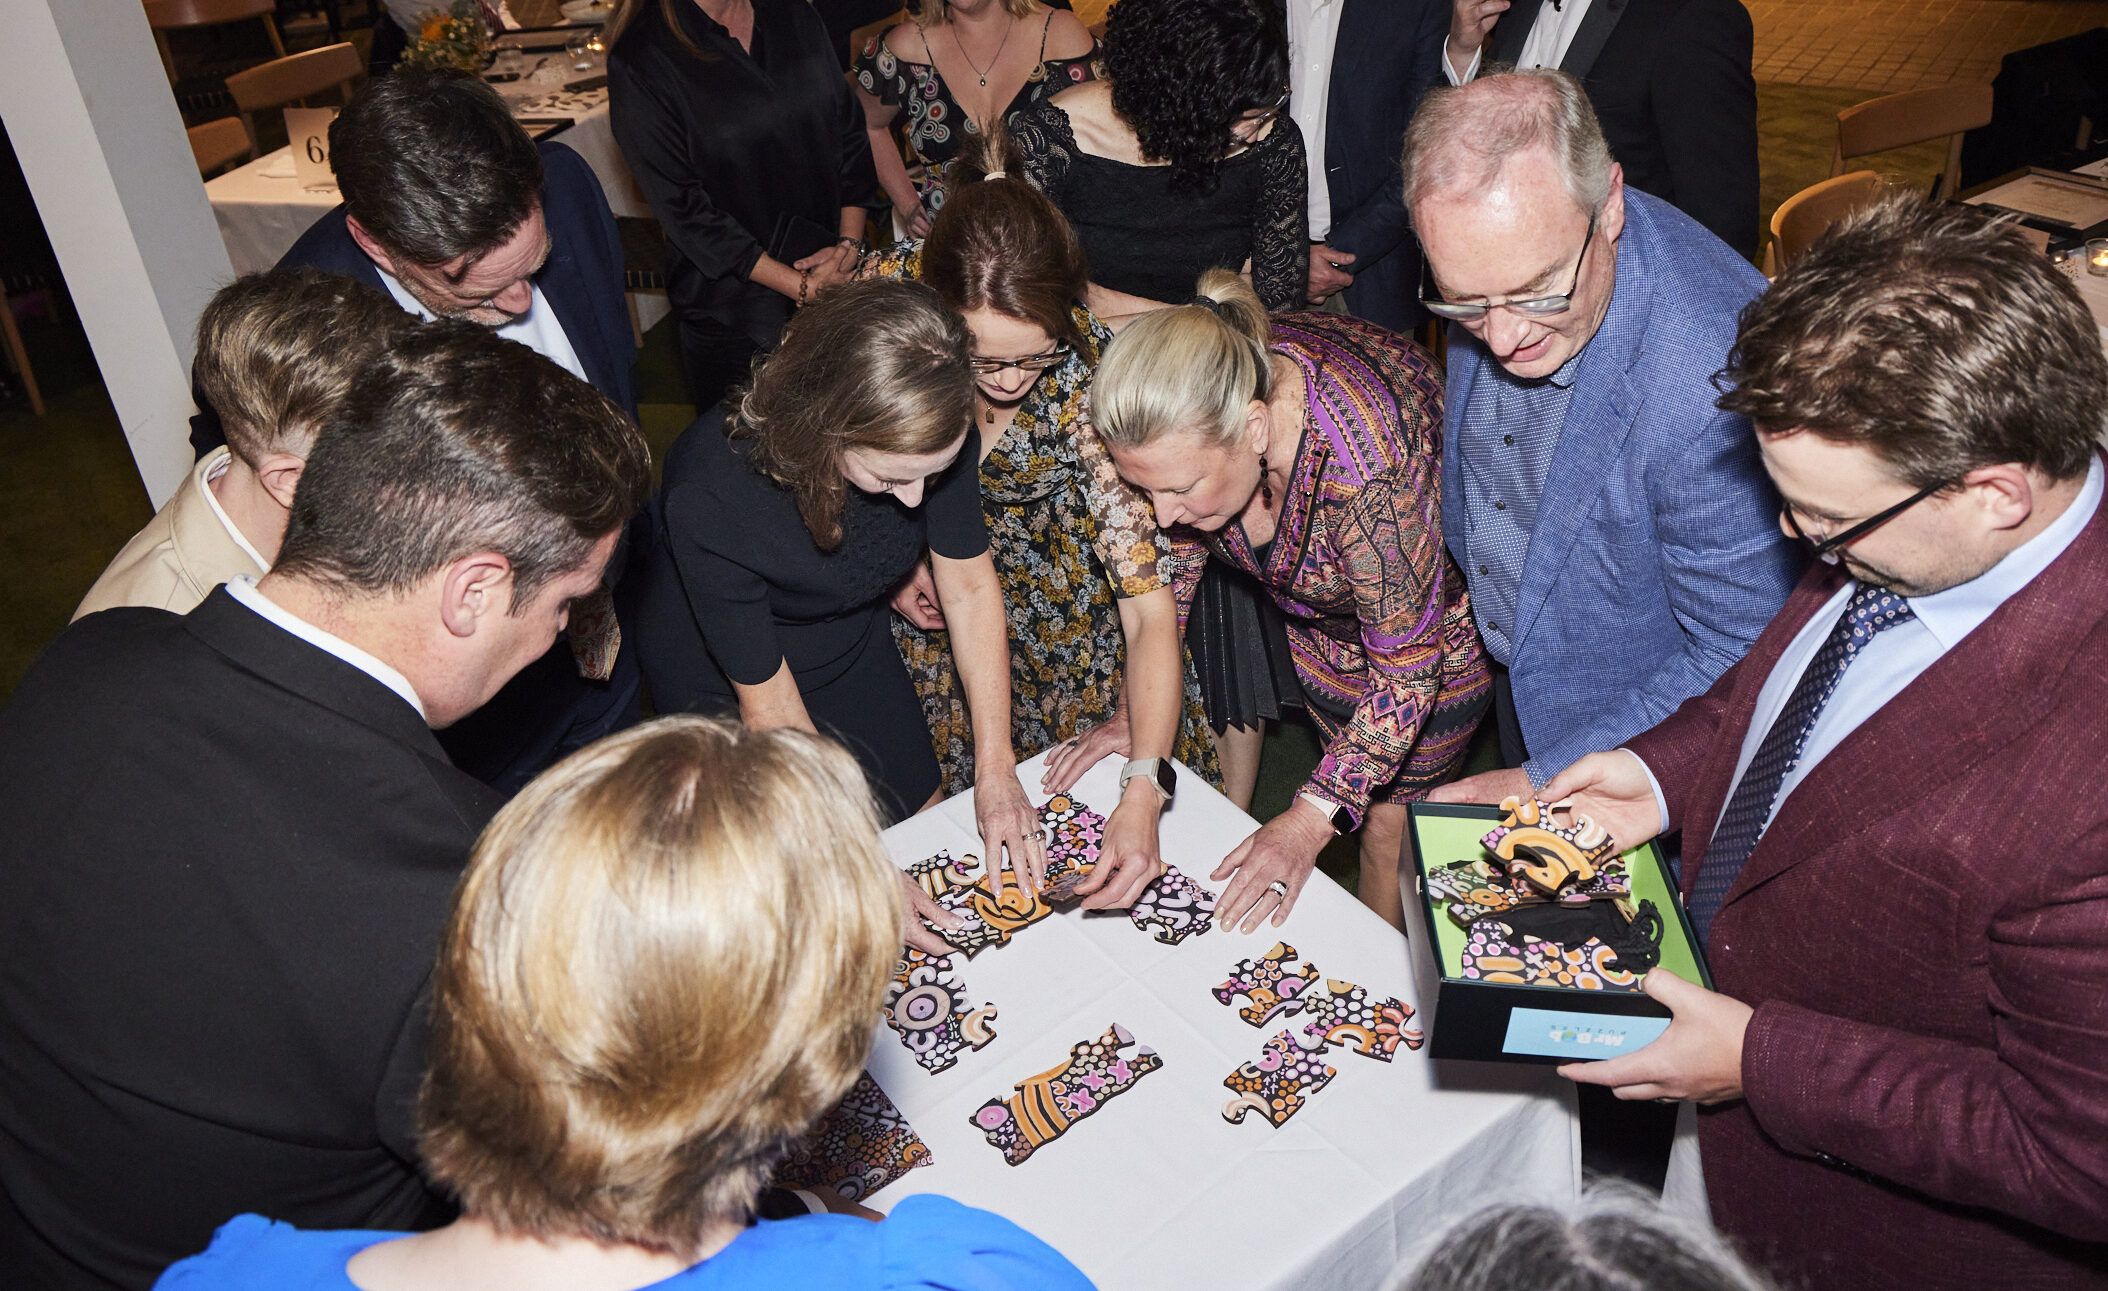 People crowded around a puzzle making it together